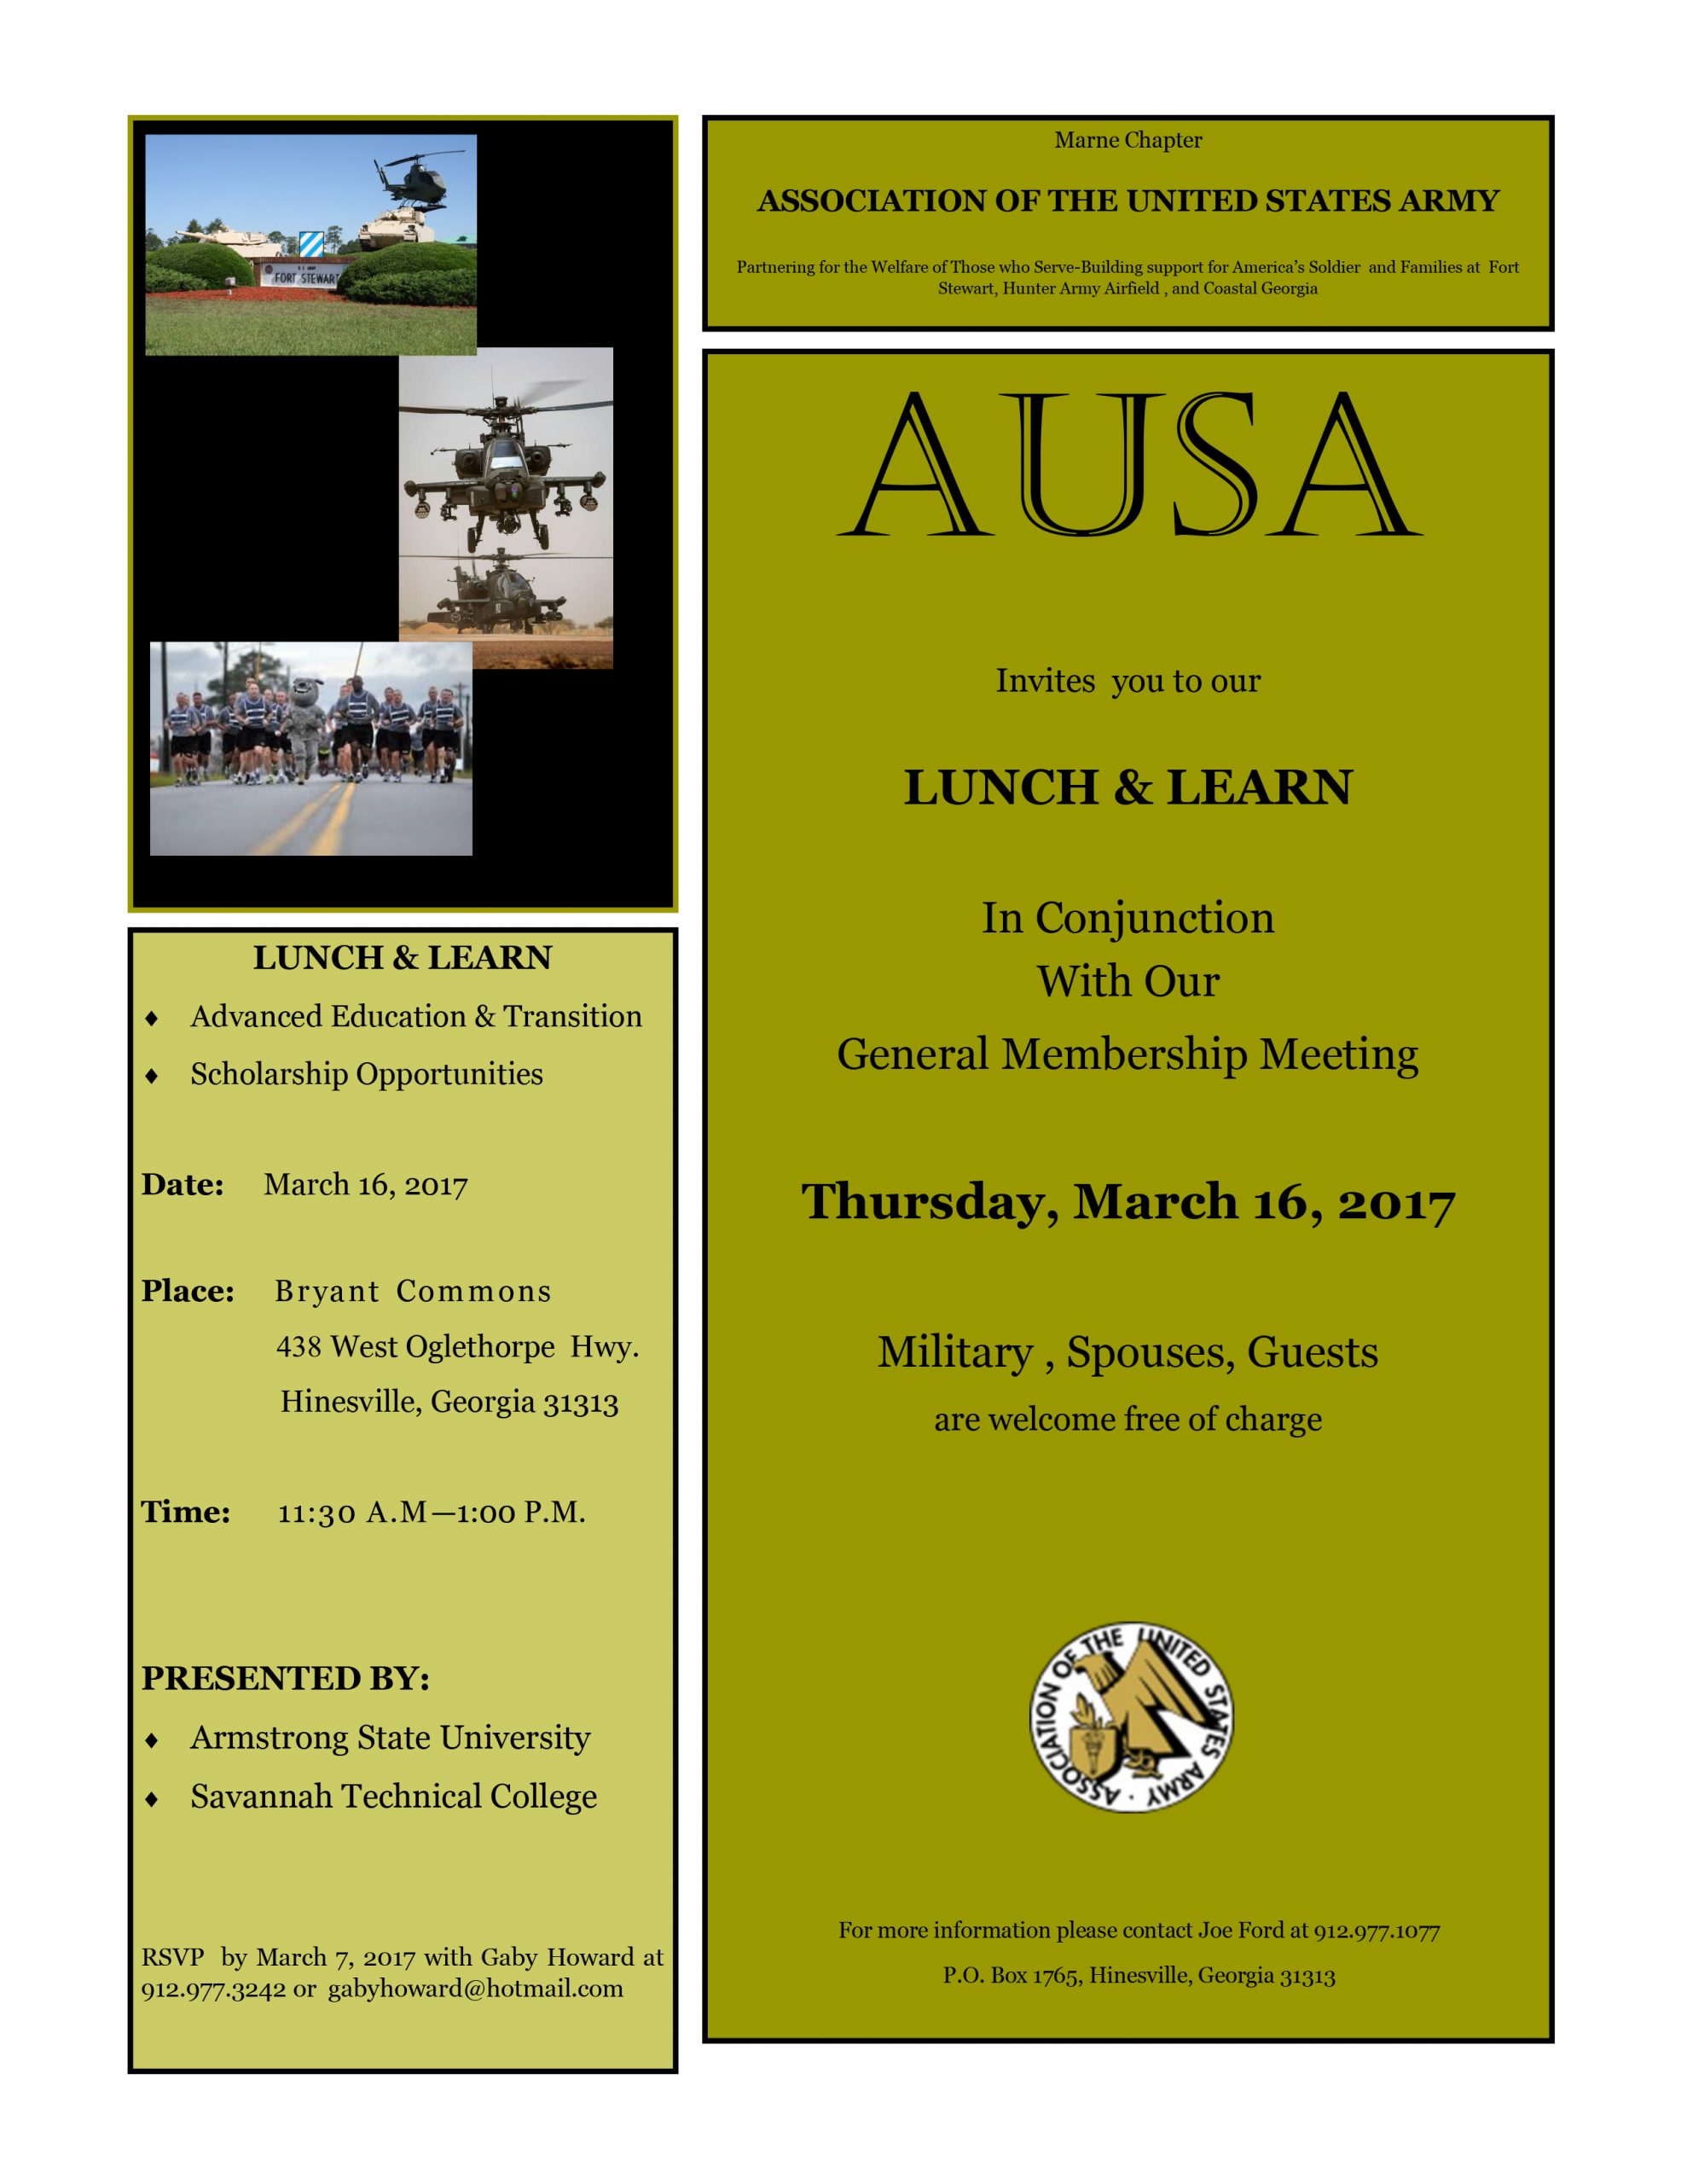 AUSA Lunch and Learn 2017